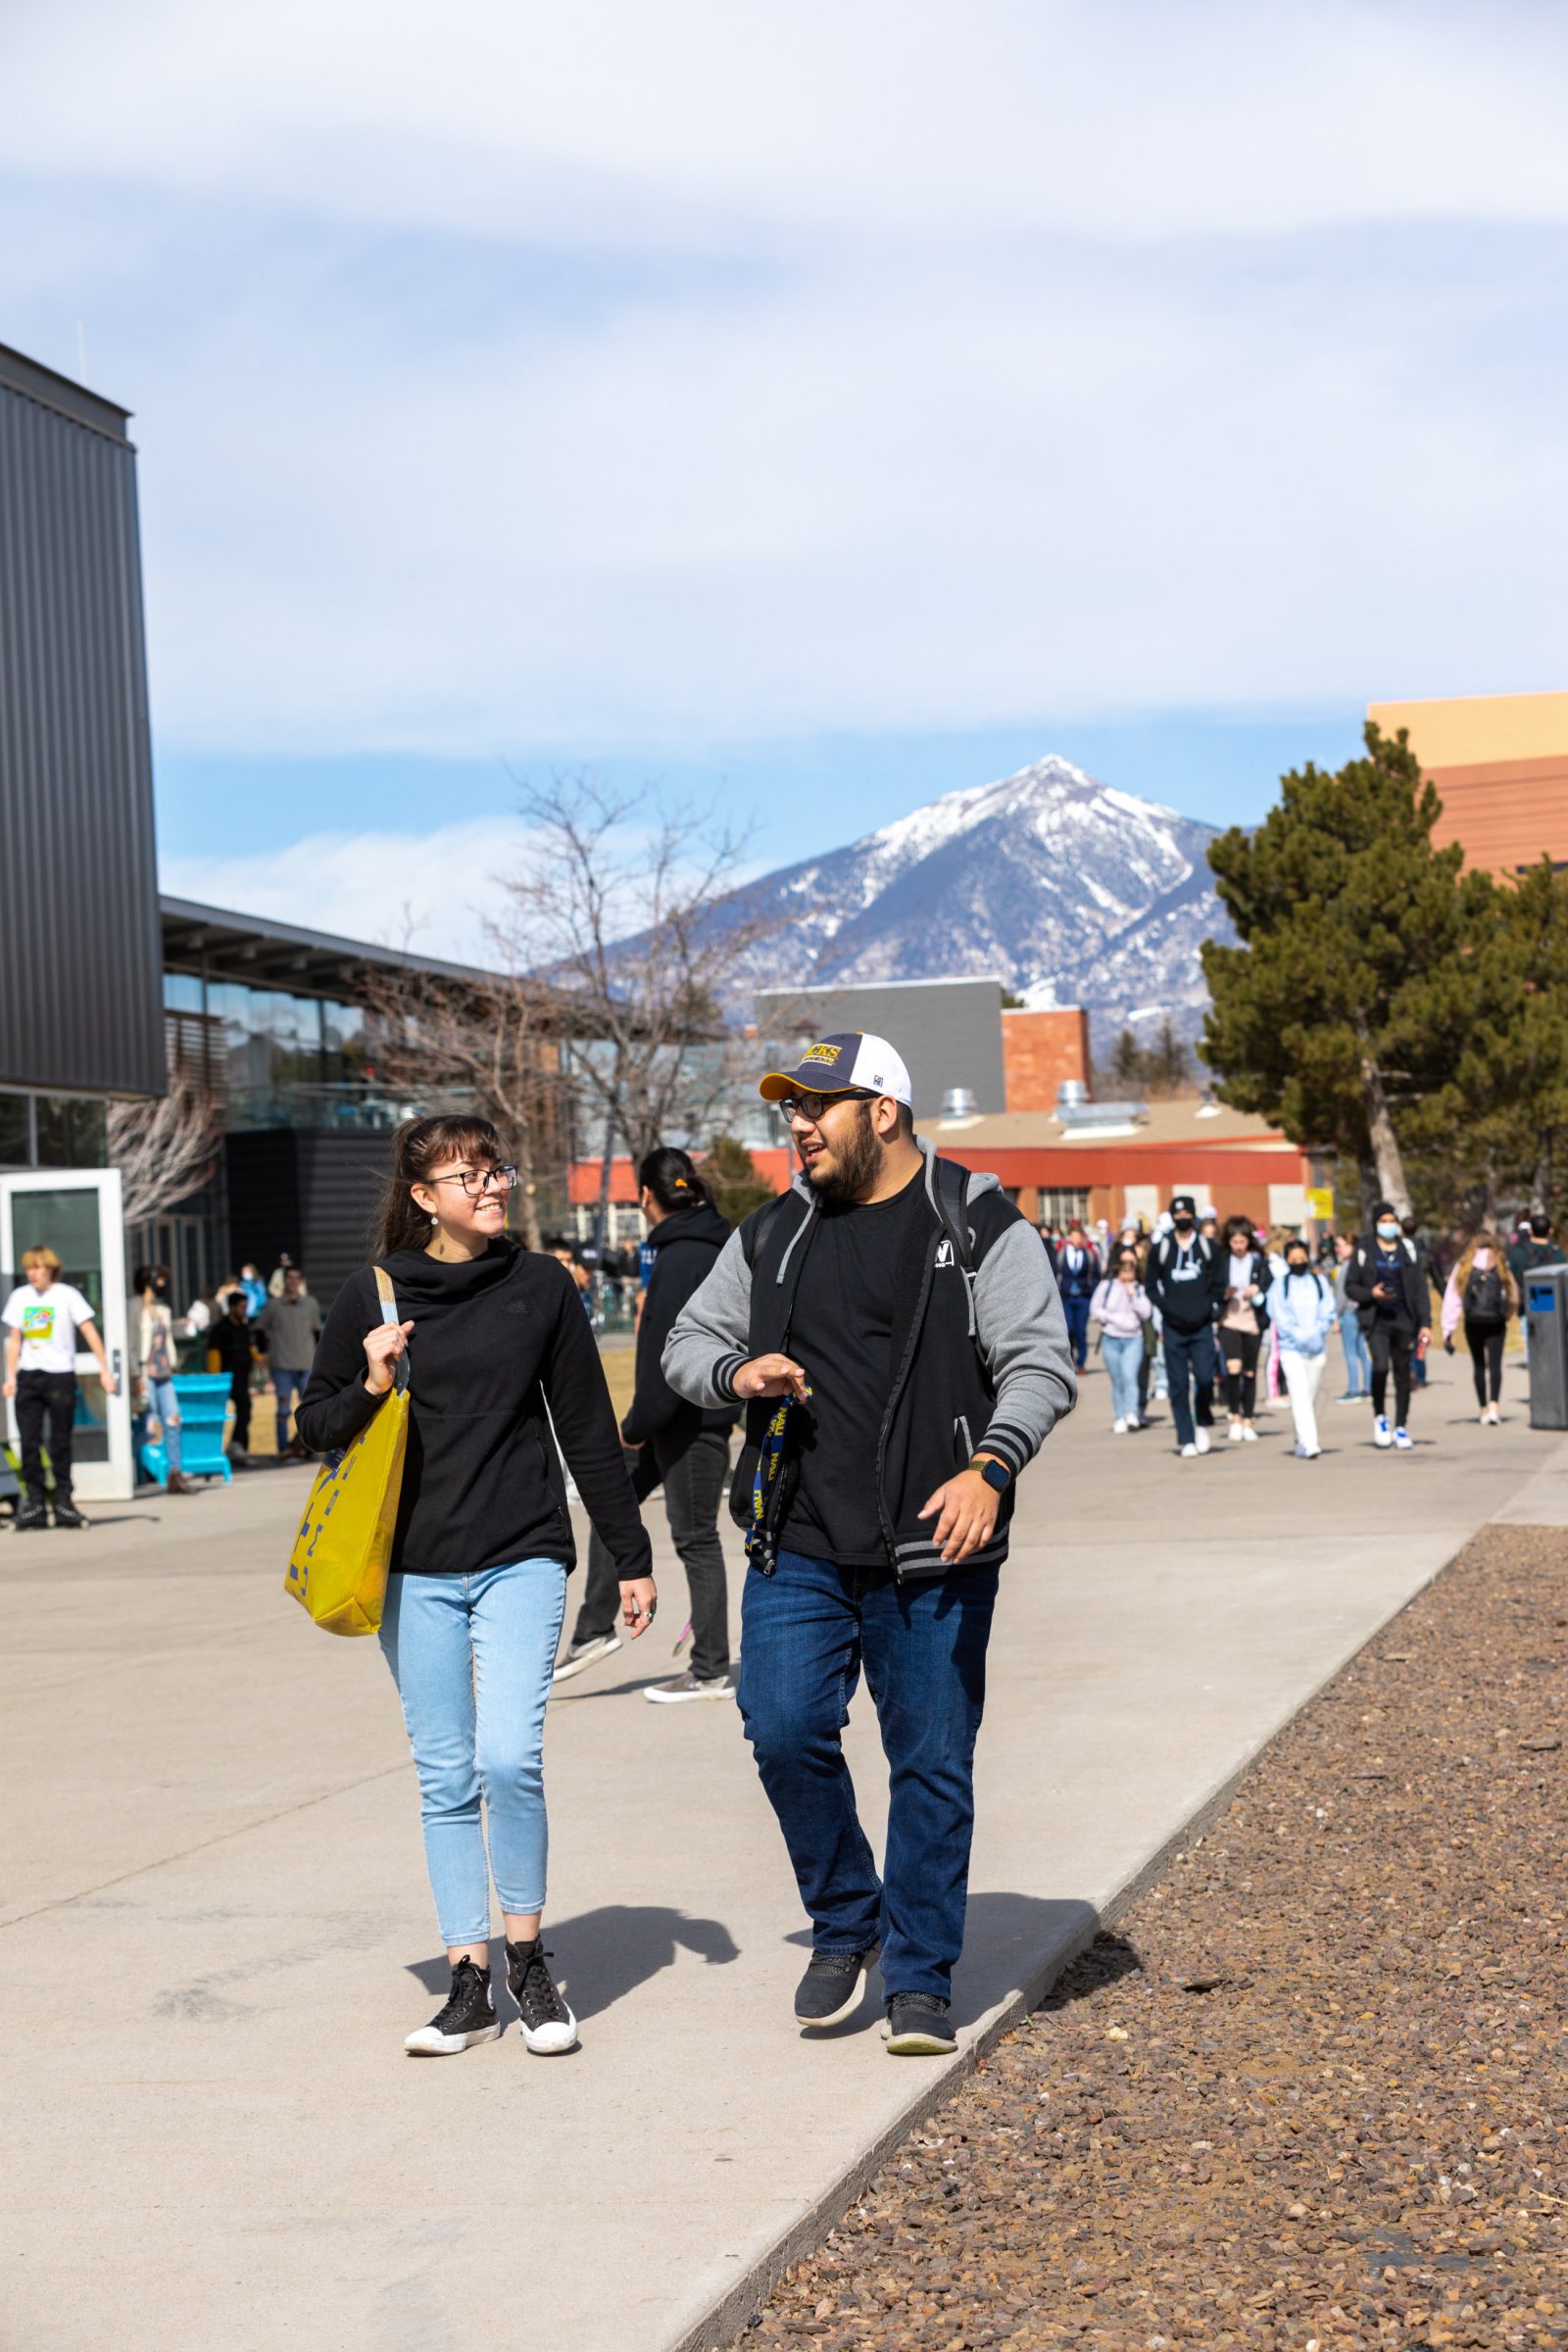 Students walk outside at NAU's Flagstaff campus with the snowcapped peaks in the background.